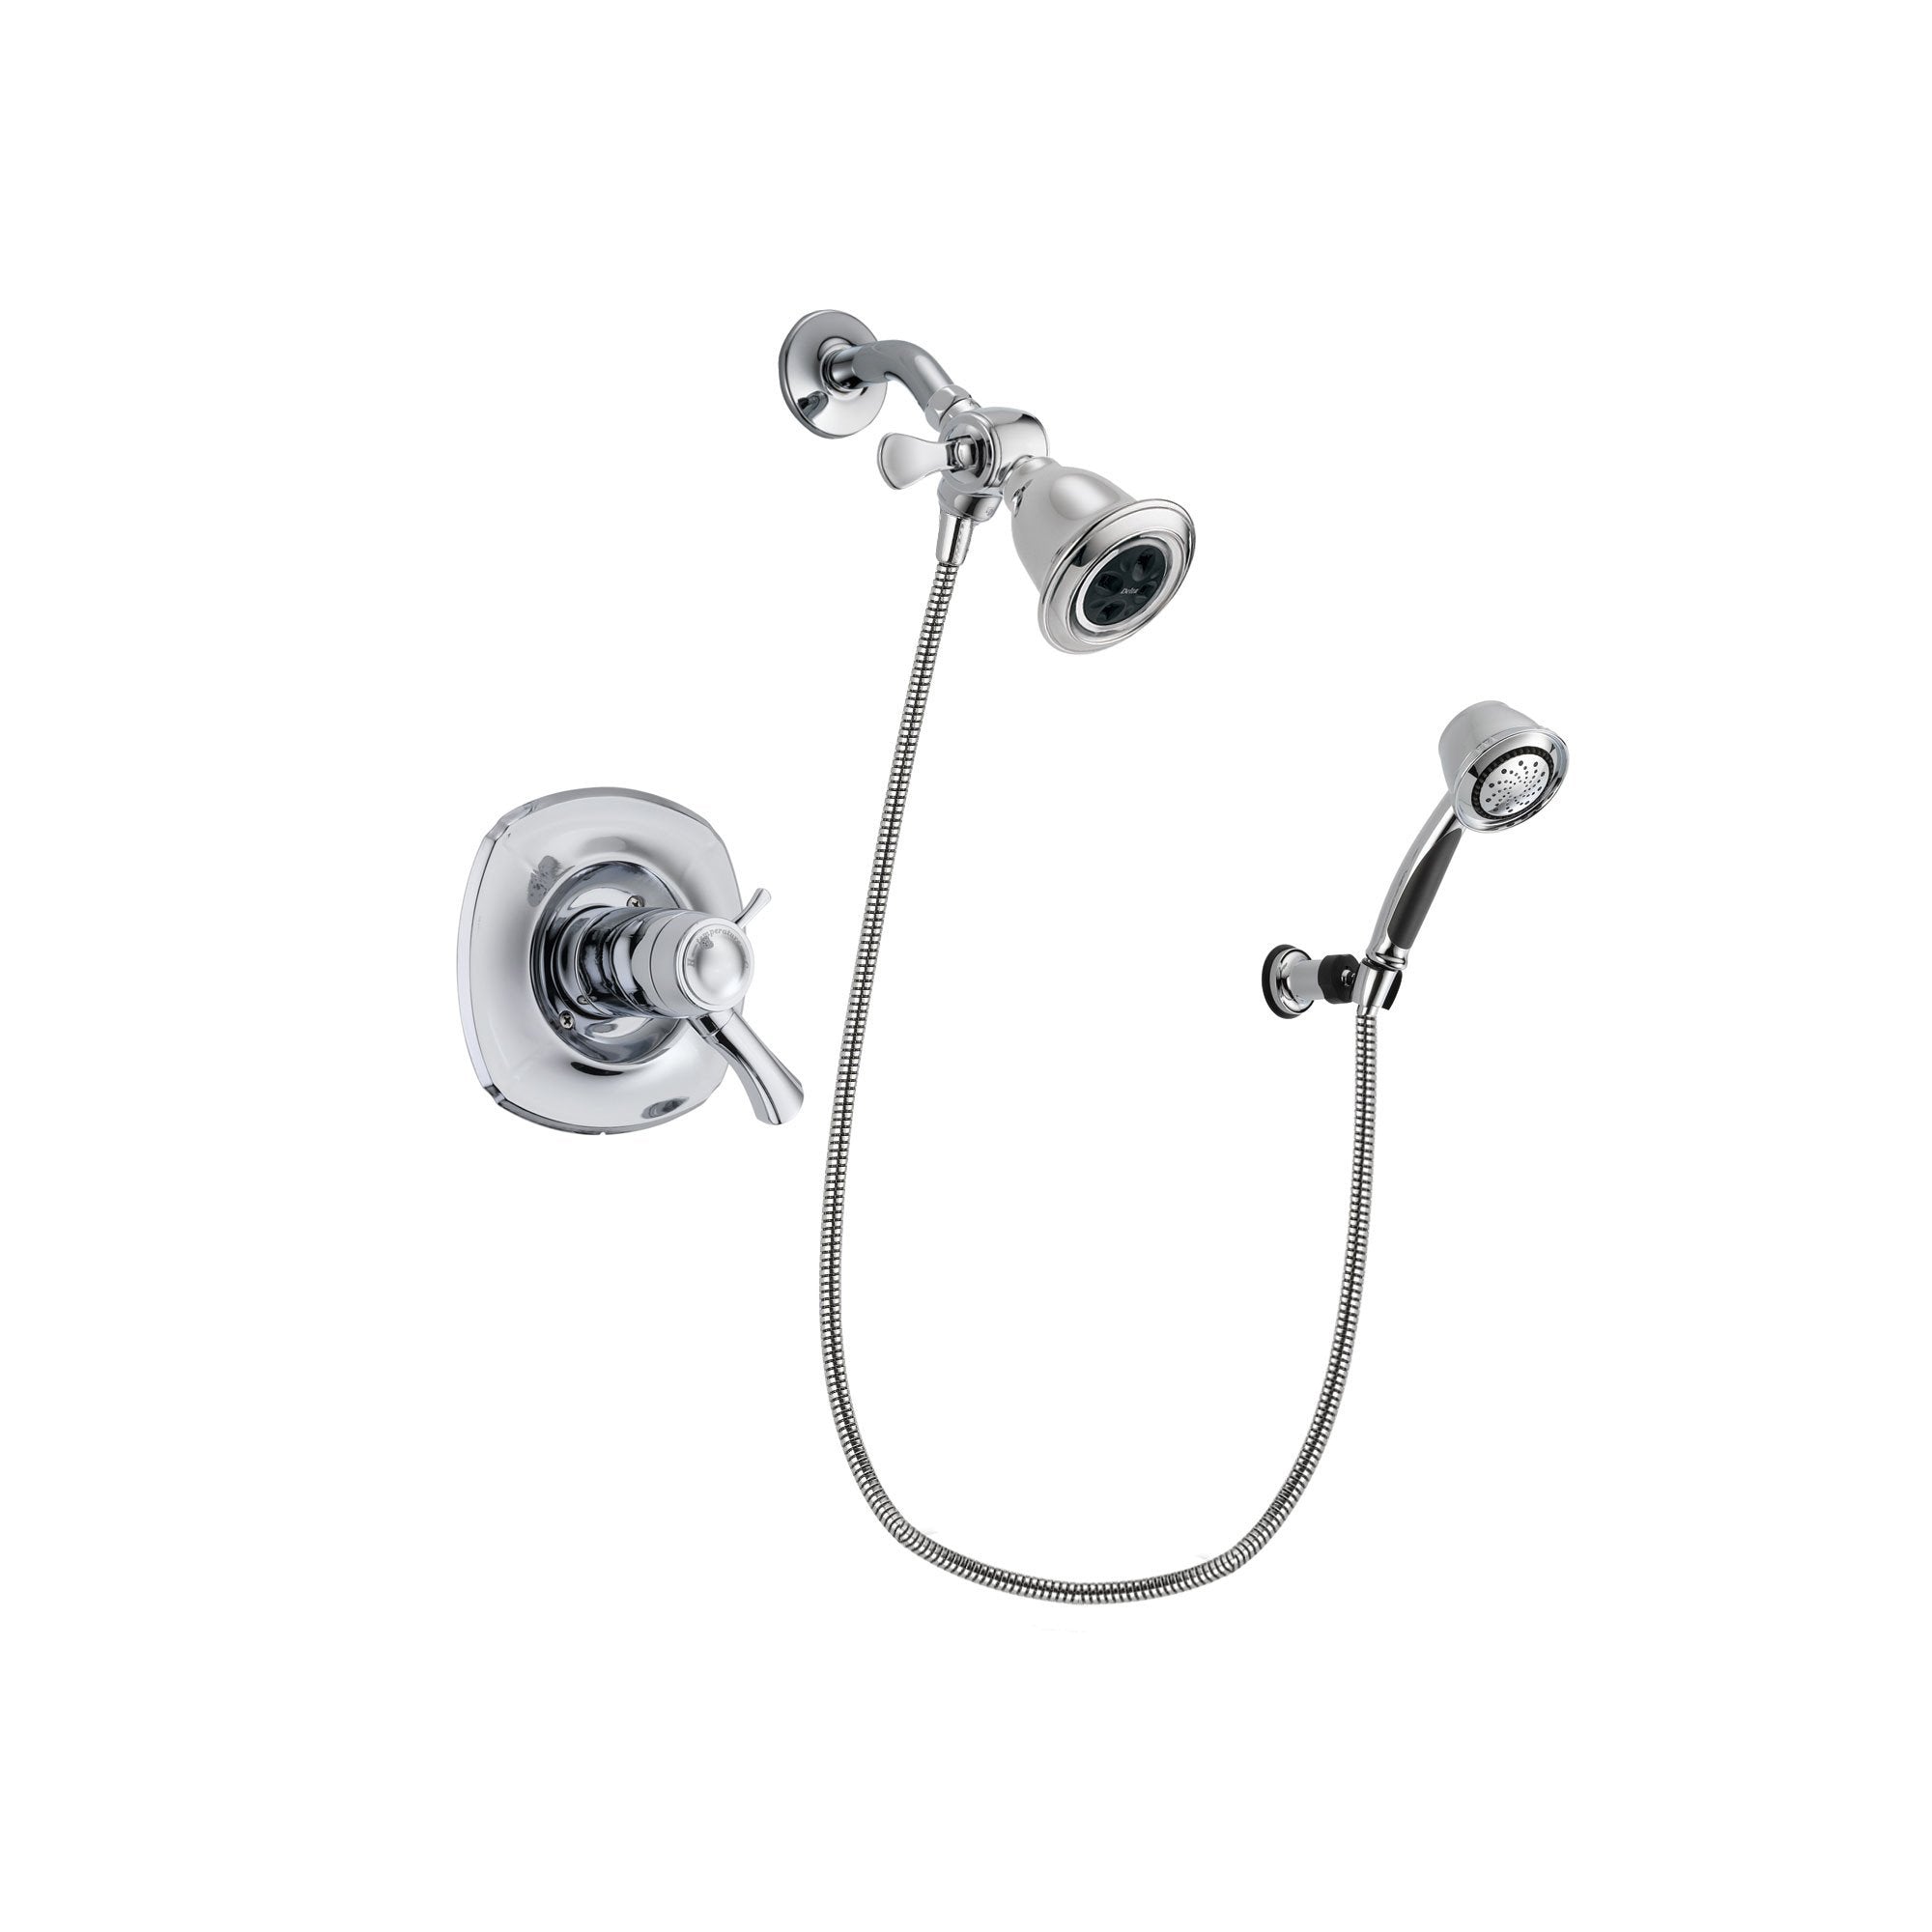 Delta Addison Chrome Finish Thermostatic Shower Faucet System Package with Water Efficient Showerhead and 5-Spray Adjustable Wall Mount Hand Shower Includes Rough-in Valve DSP0330V